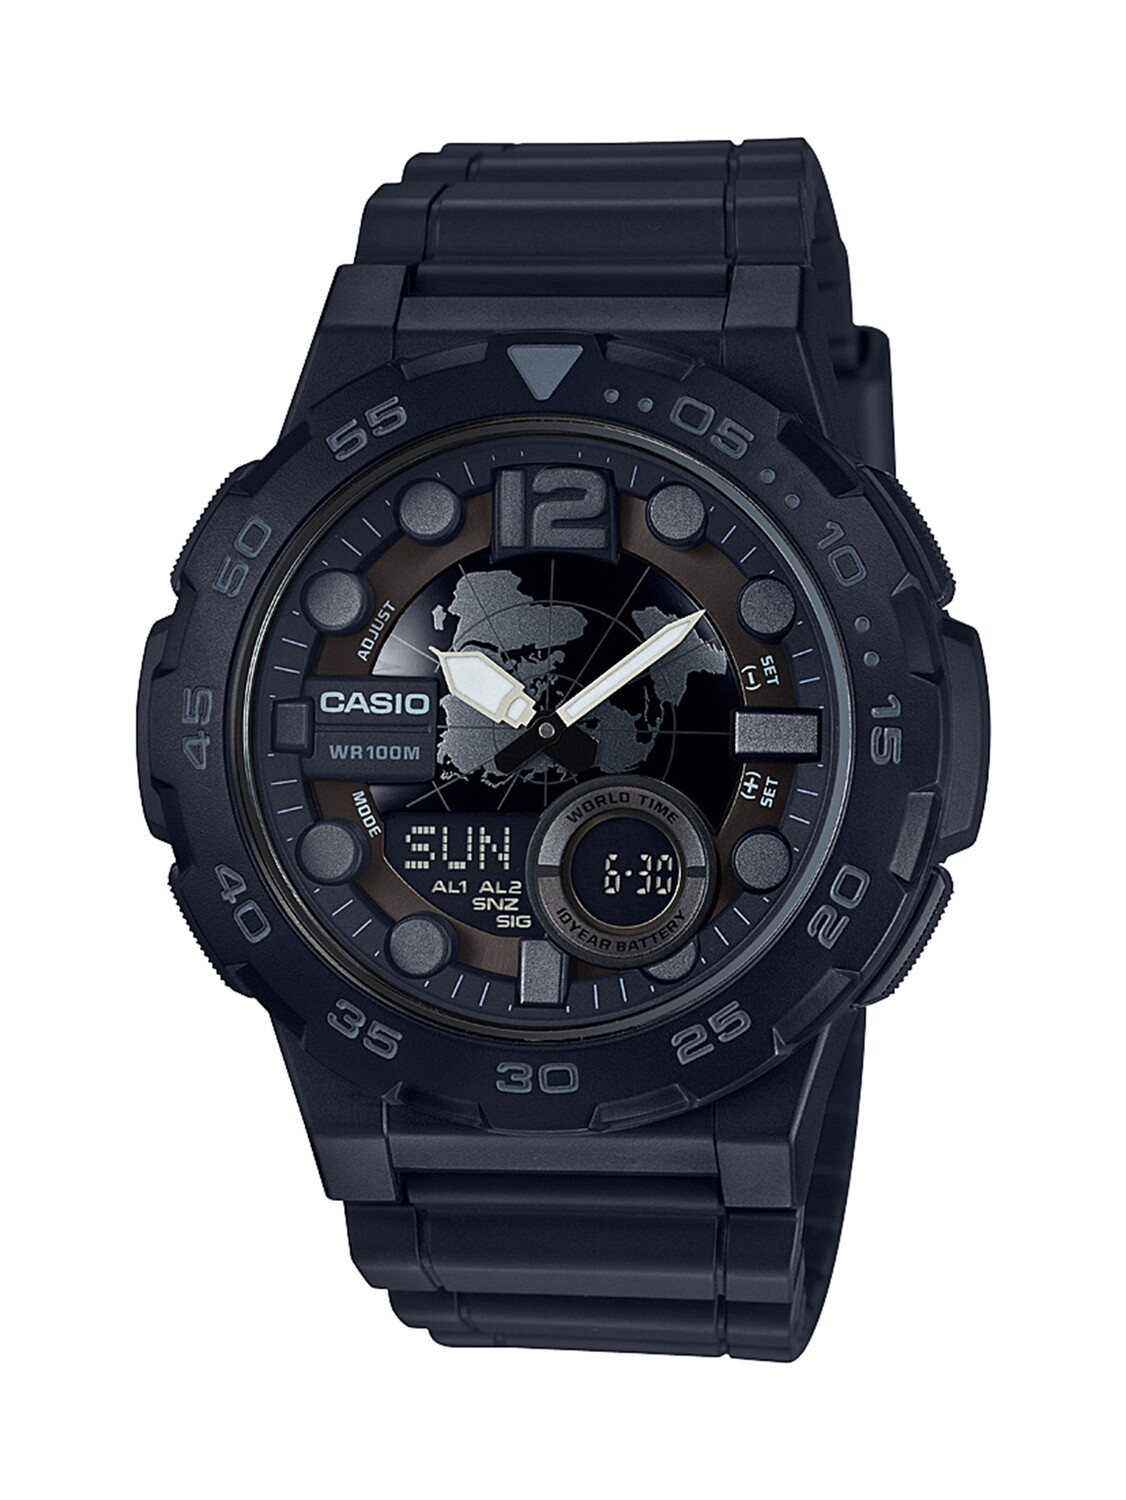 Casio Men's 'Classic' Quartz Stainless Steel and Resin Casual Watch, Color Black (Model: AEQ-100W-1BVCF)